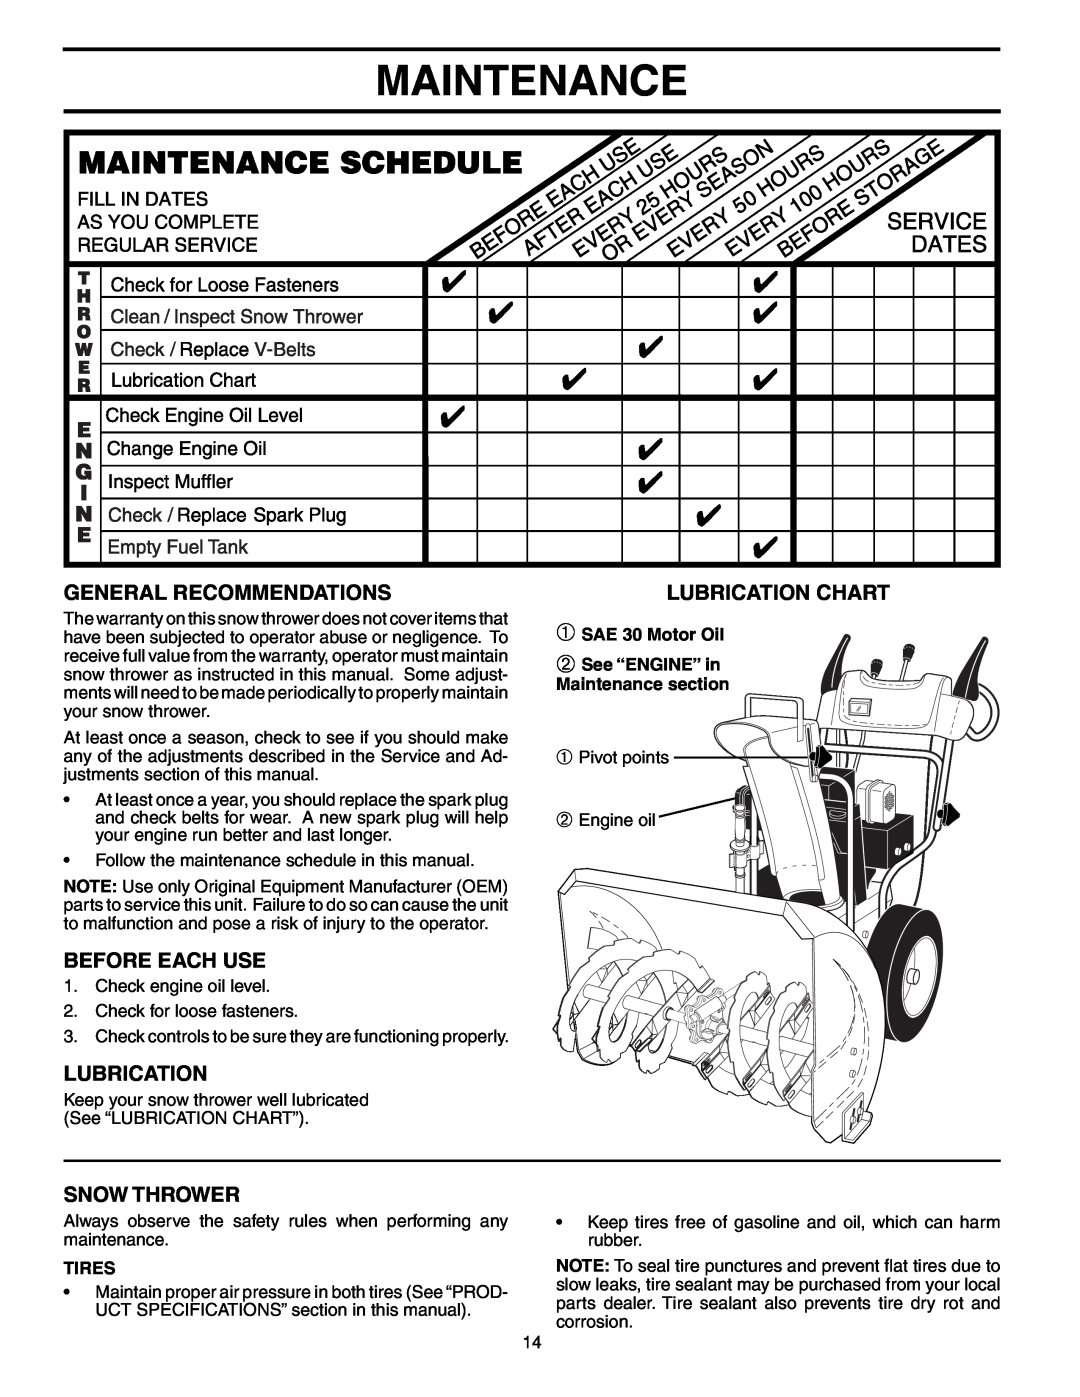 Poulan PP5524ESC Maintenance, General Recommendations, Before Each Use, Snow Thrower, Lubrication Chart, Tires 